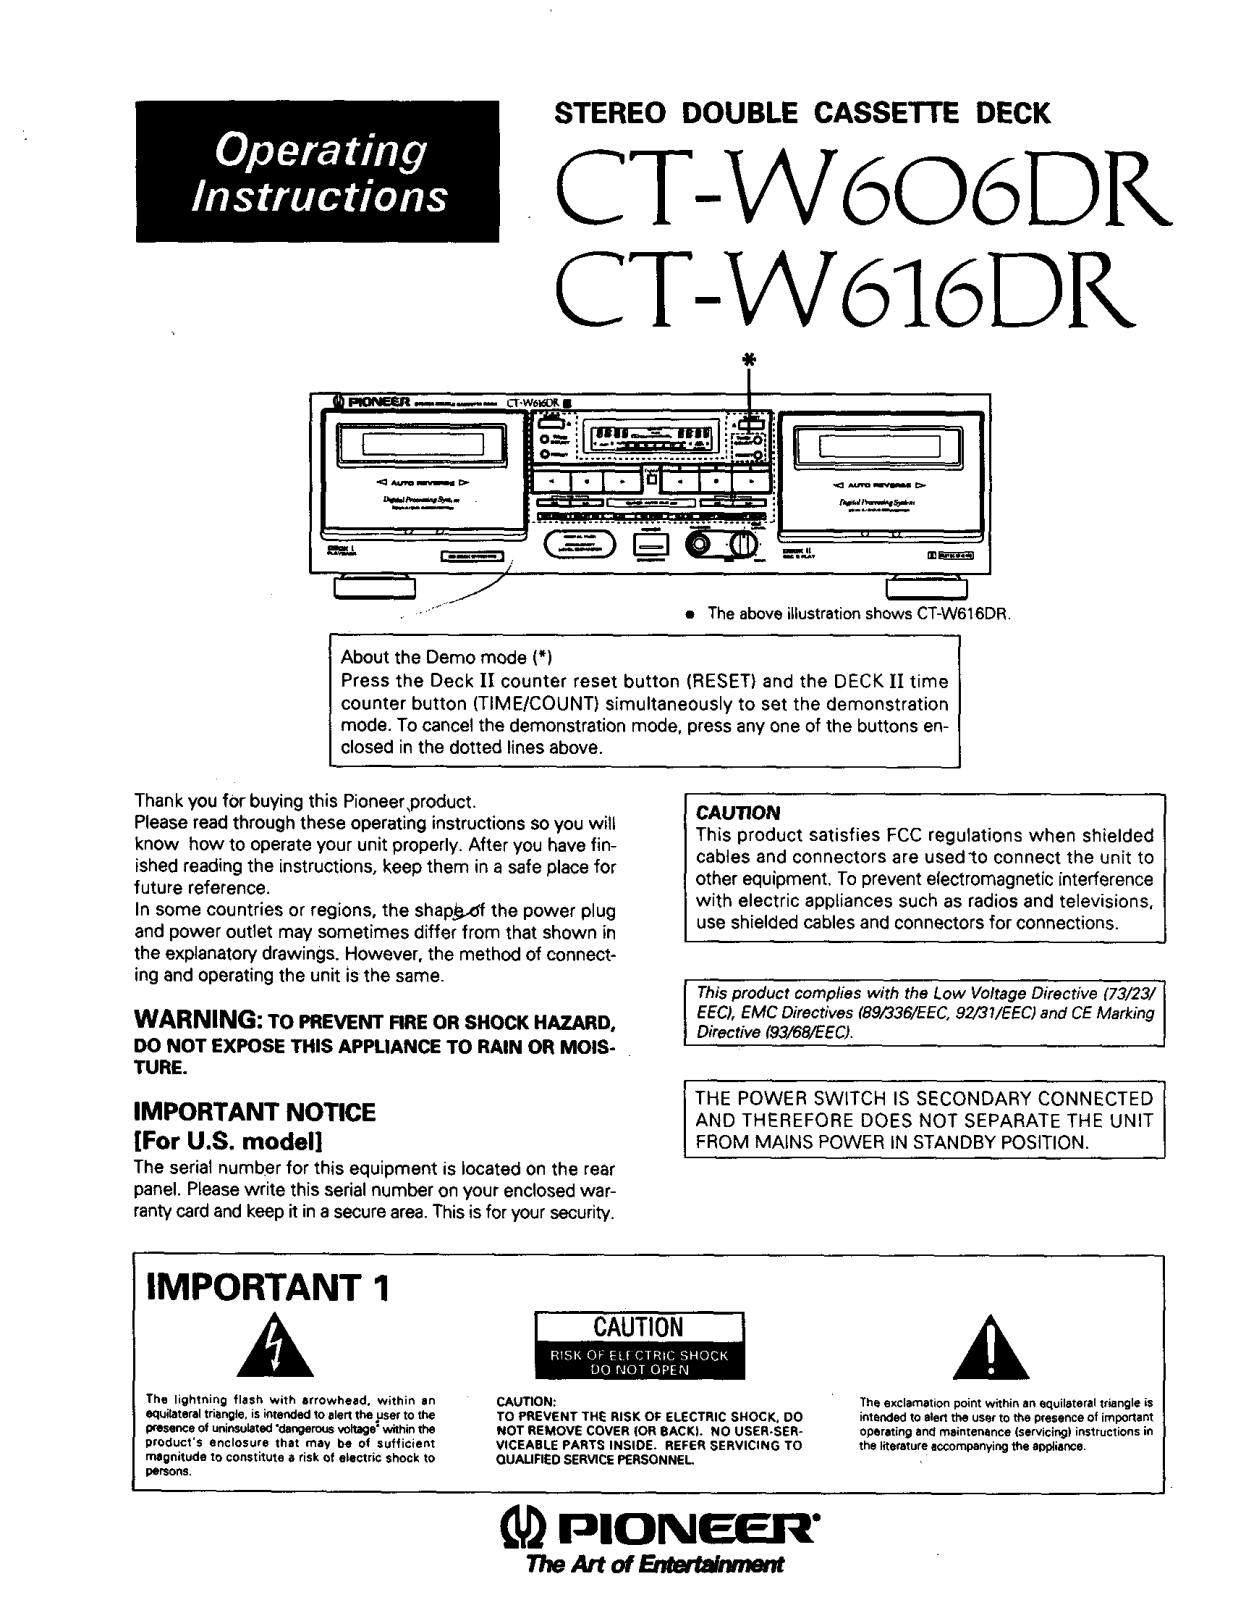 Pioneer CT-W616DR, CT-W606DR Owner’s Manual